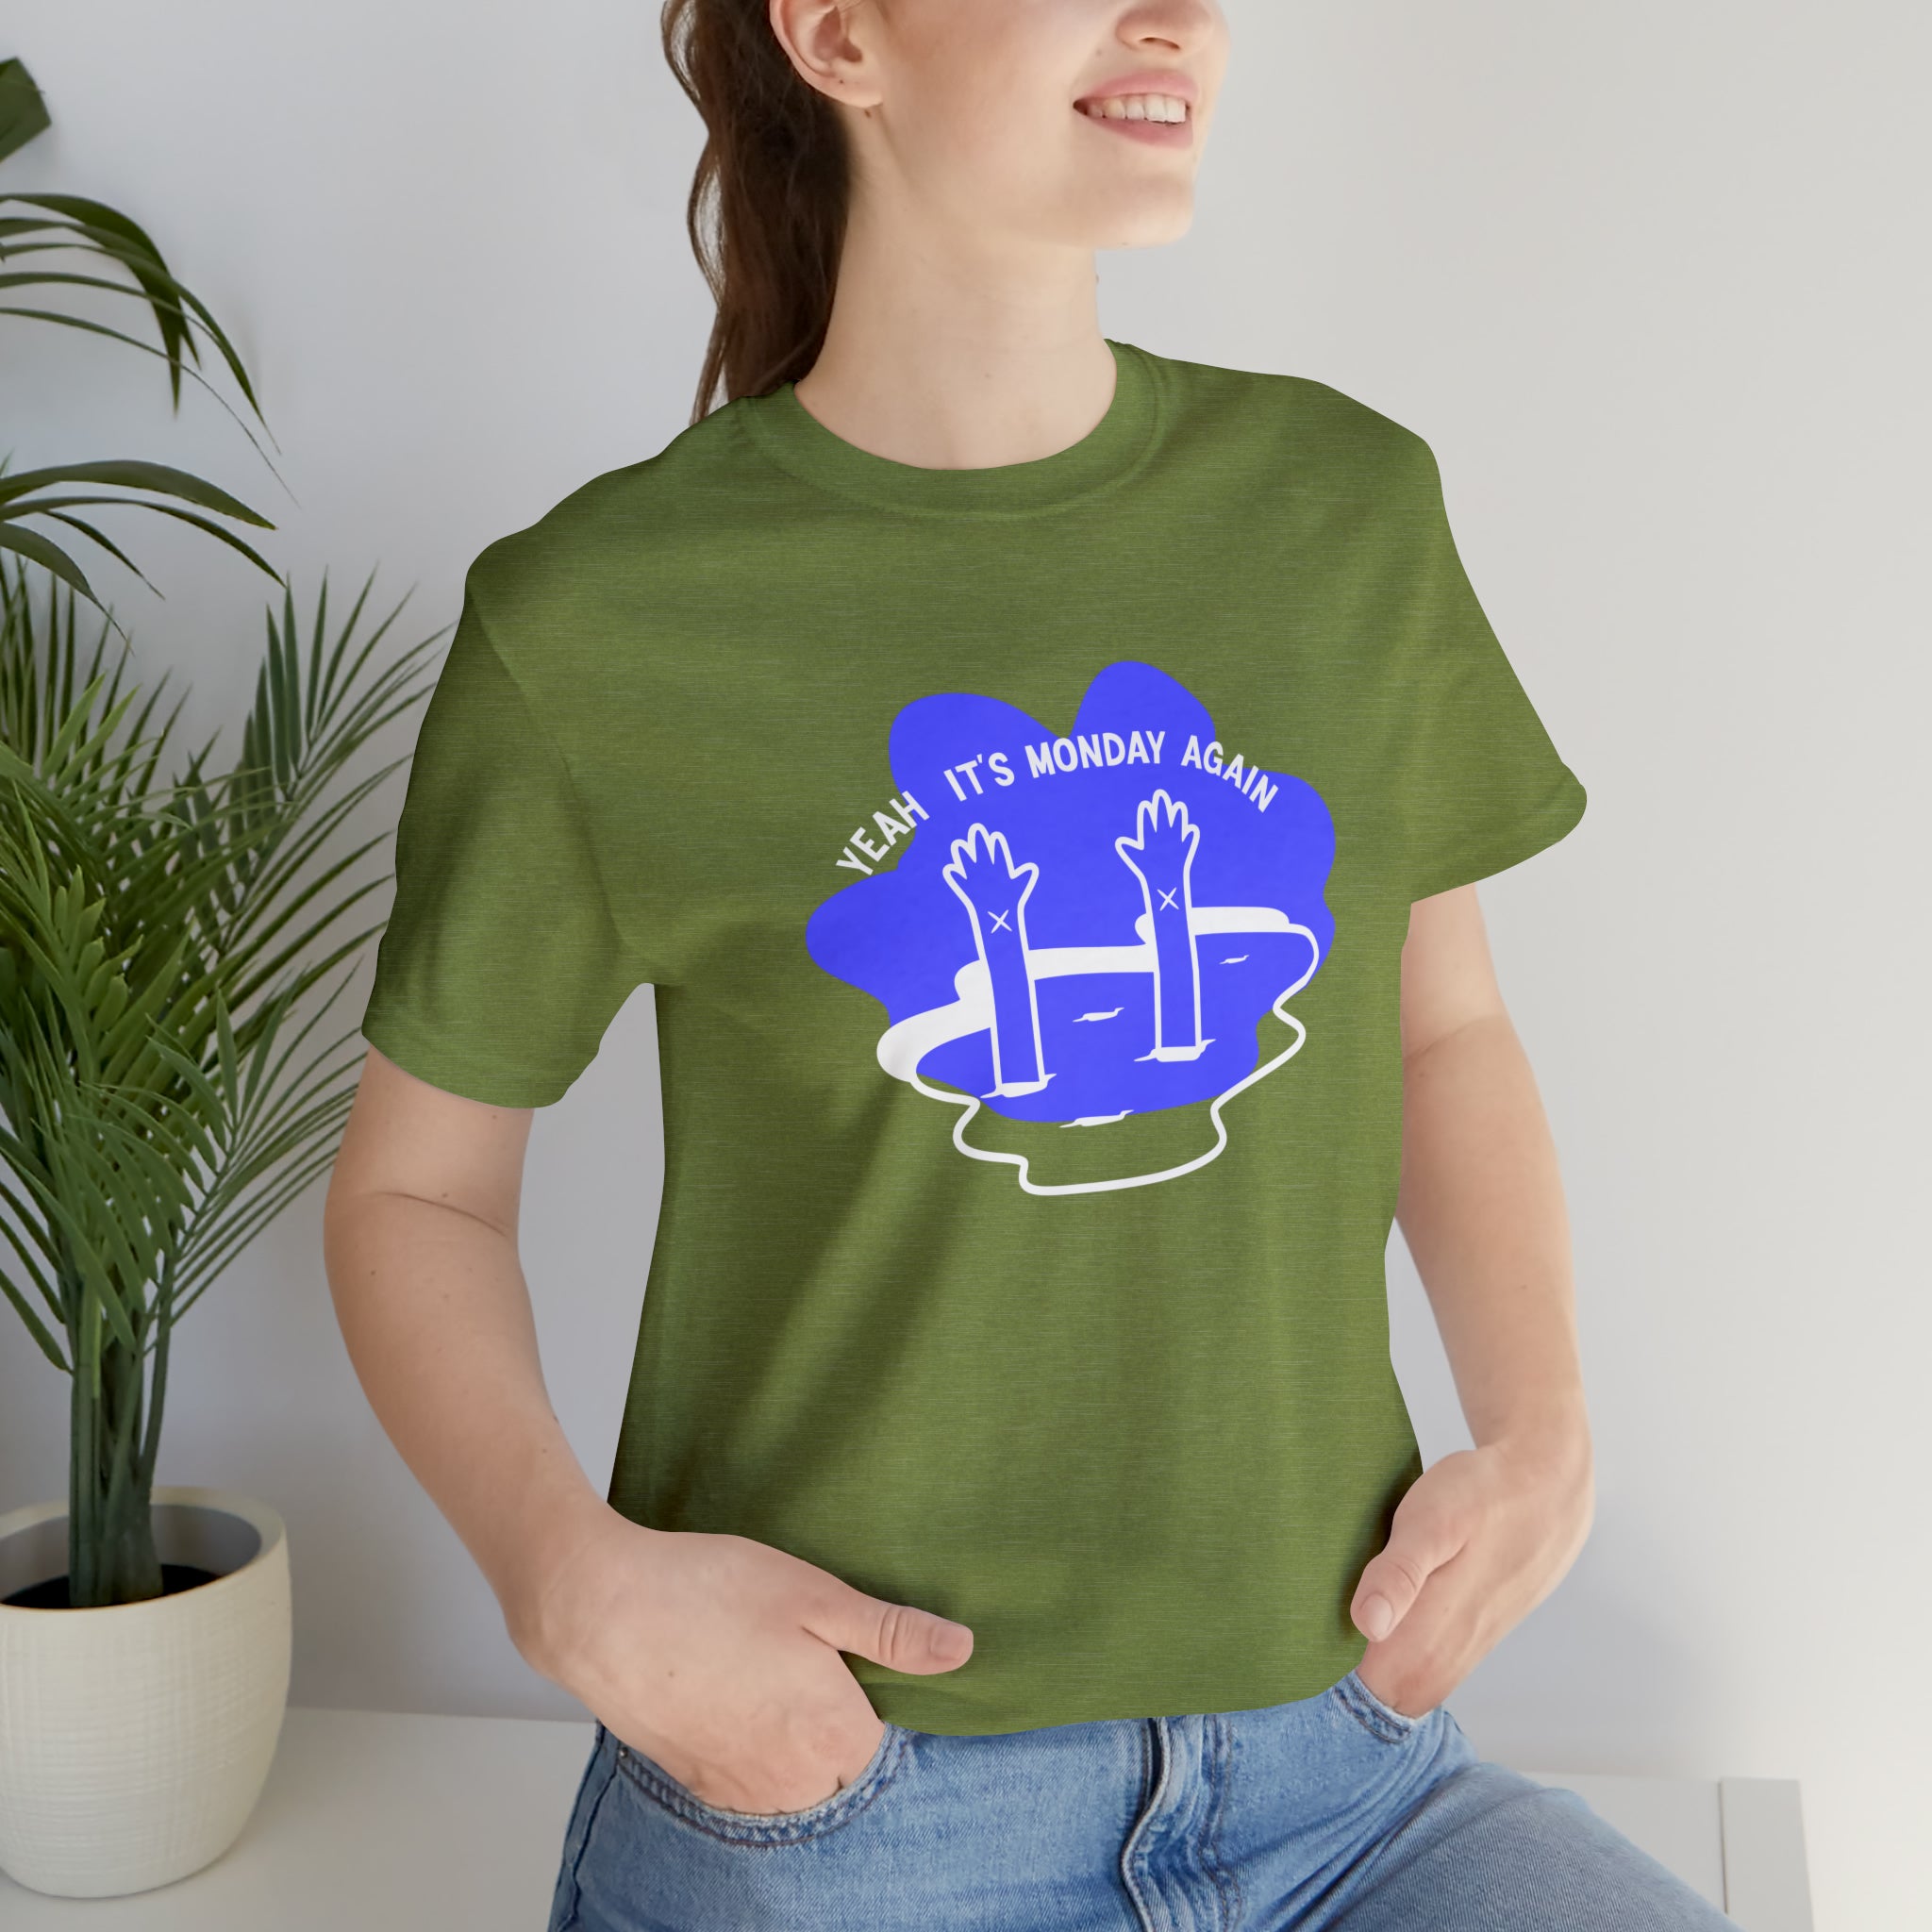 A woman wearing her favorite Yeah Its Monday Again T-Shirt, a green cotton tee with a blue flower on it.